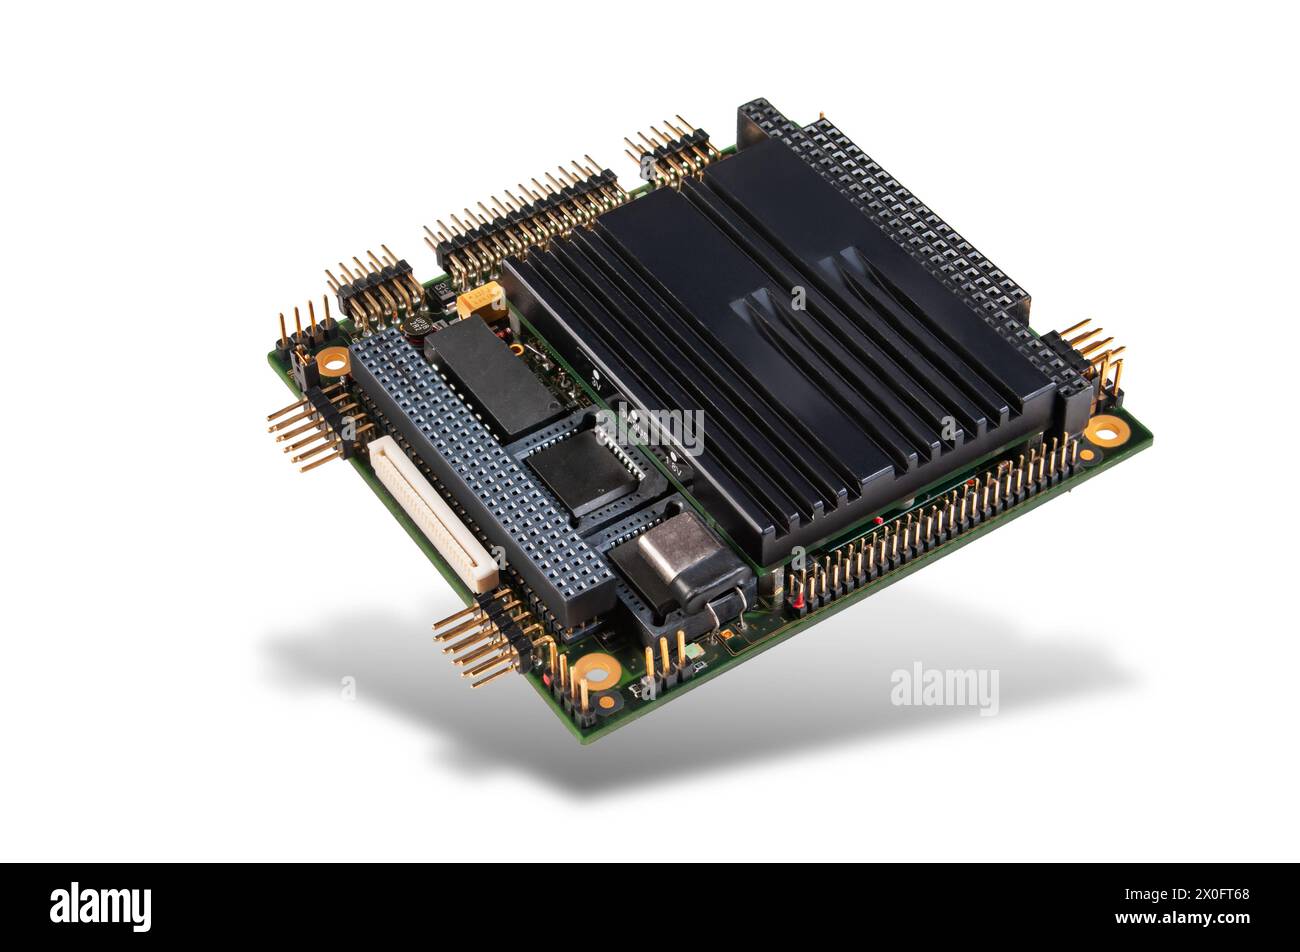 Close-up of an embedded PC/104+ CPU module with integrated chips and connectors, isolated on a white background. Stock Photo